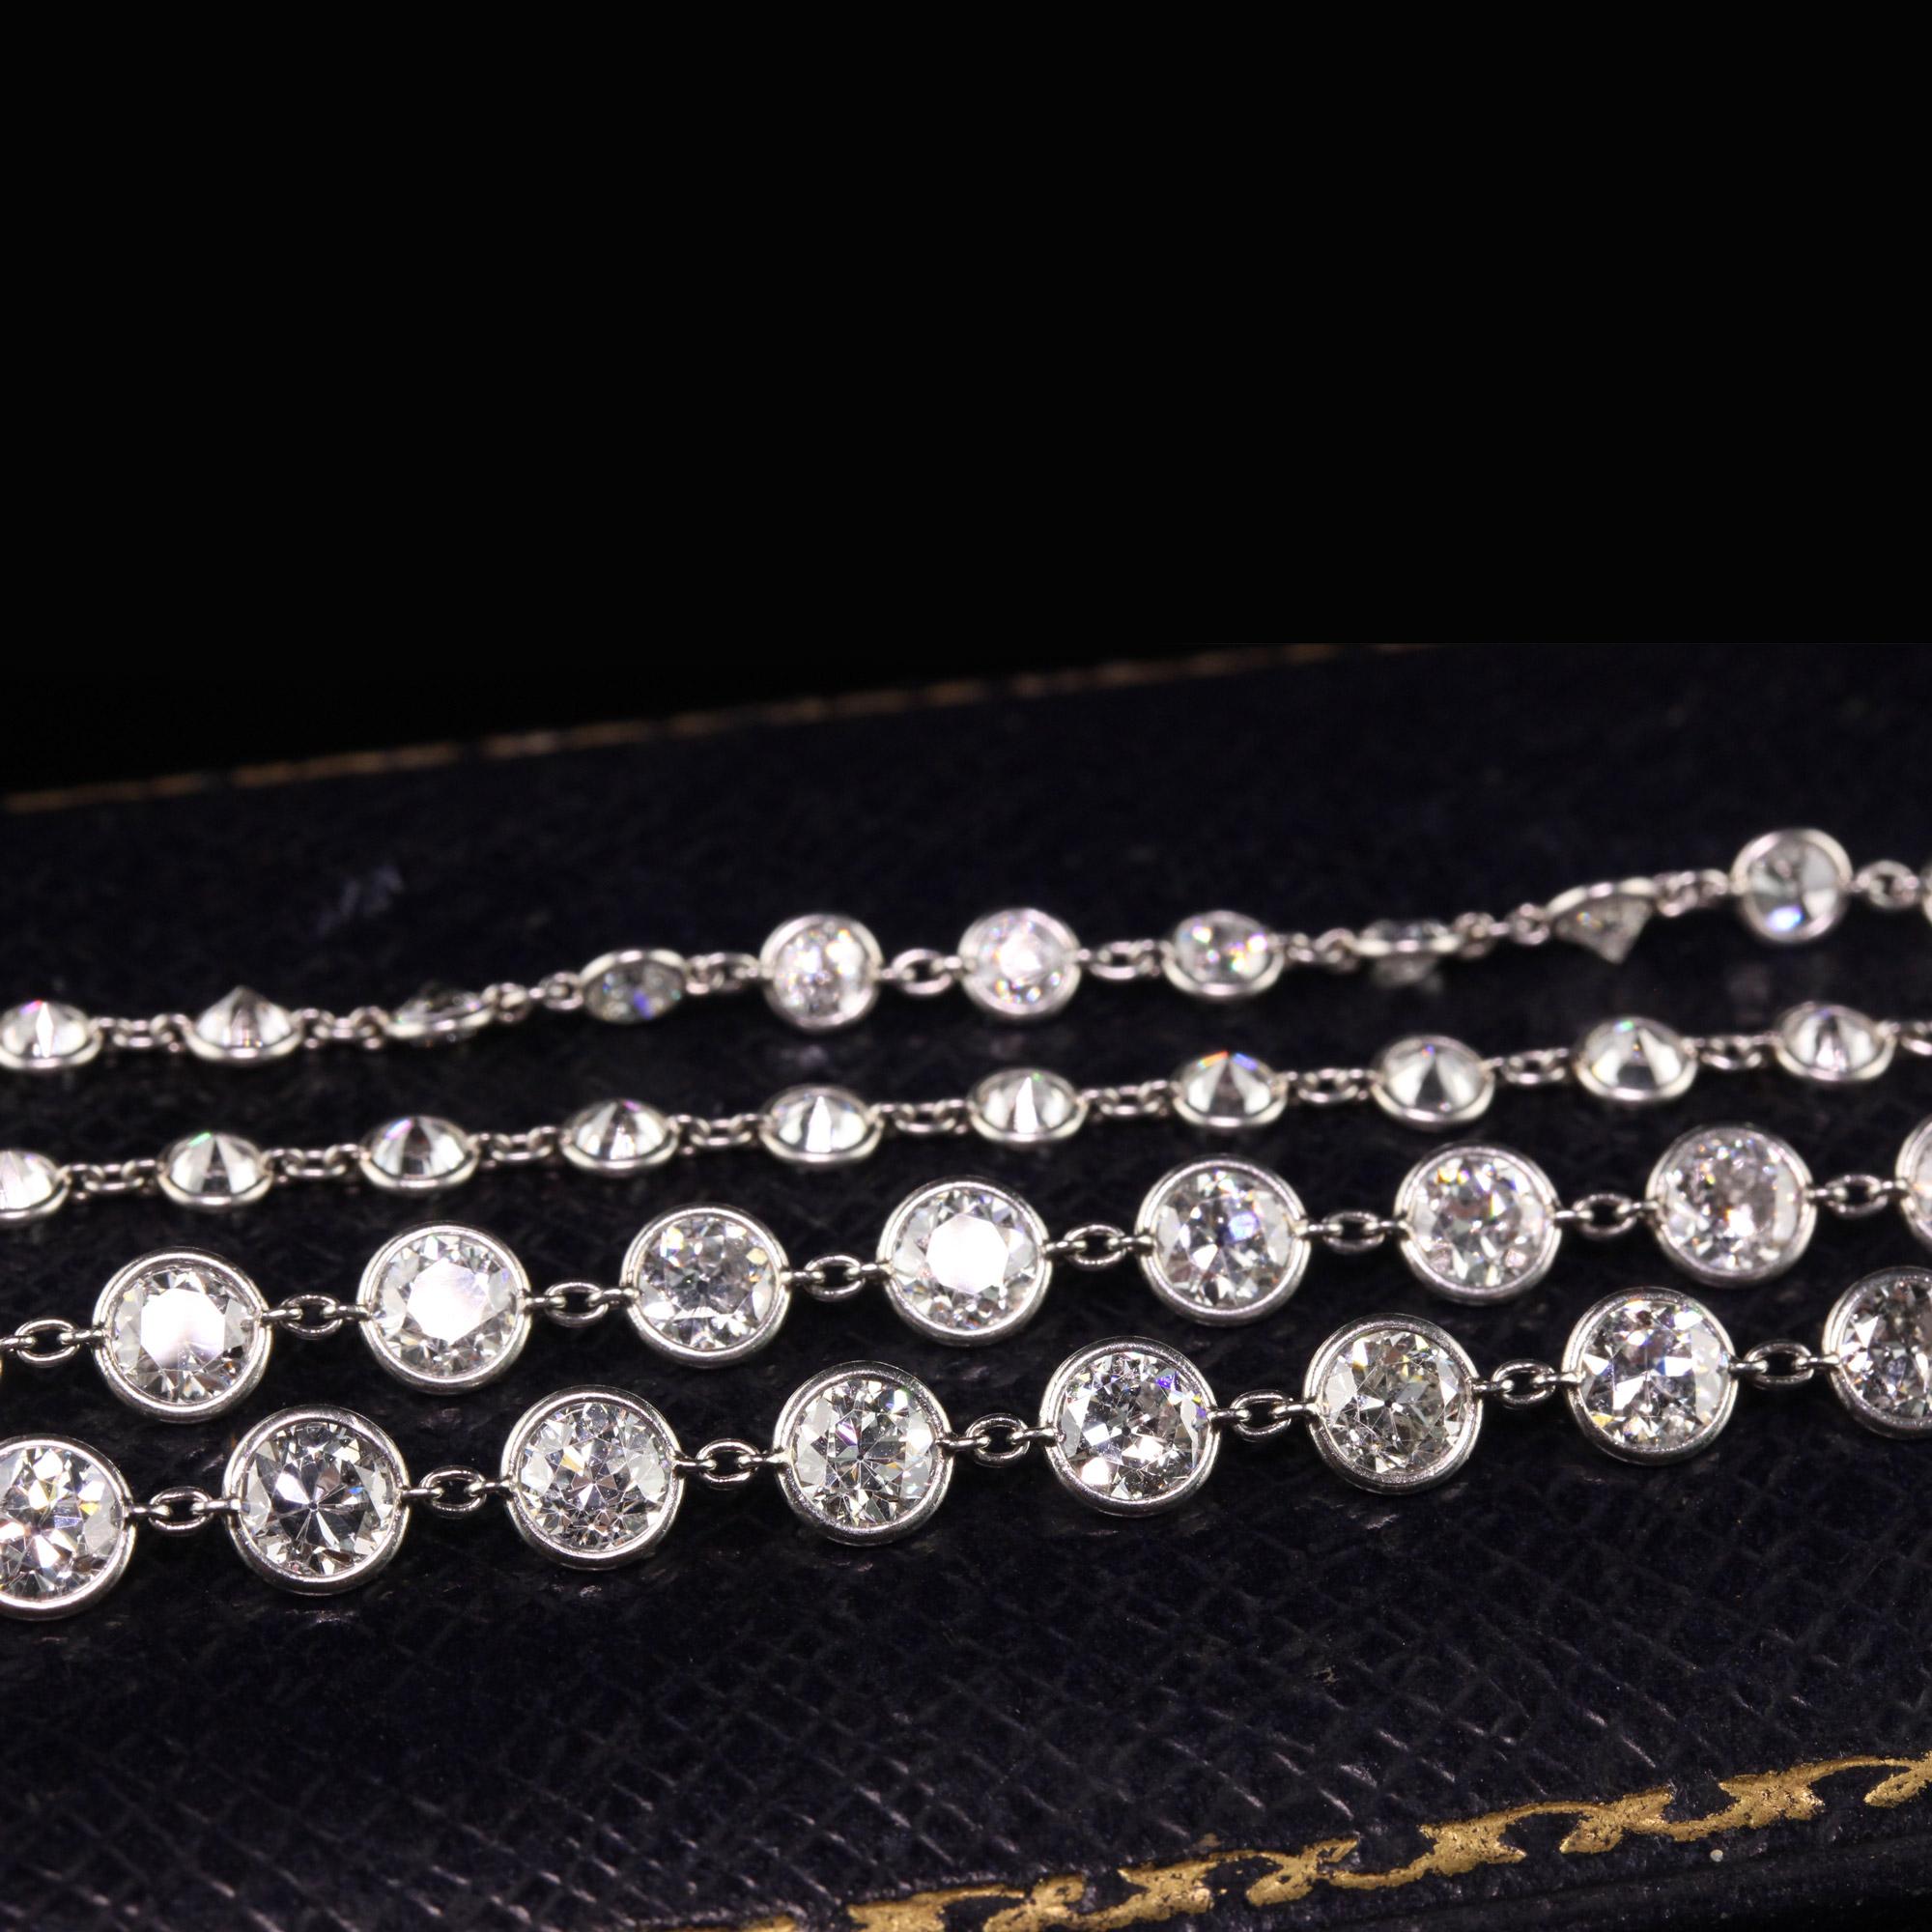 Antique Art Deco Platinum Graduated Old European Diamonds by the Yard Necklace In Good Condition For Sale In Great Neck, NY